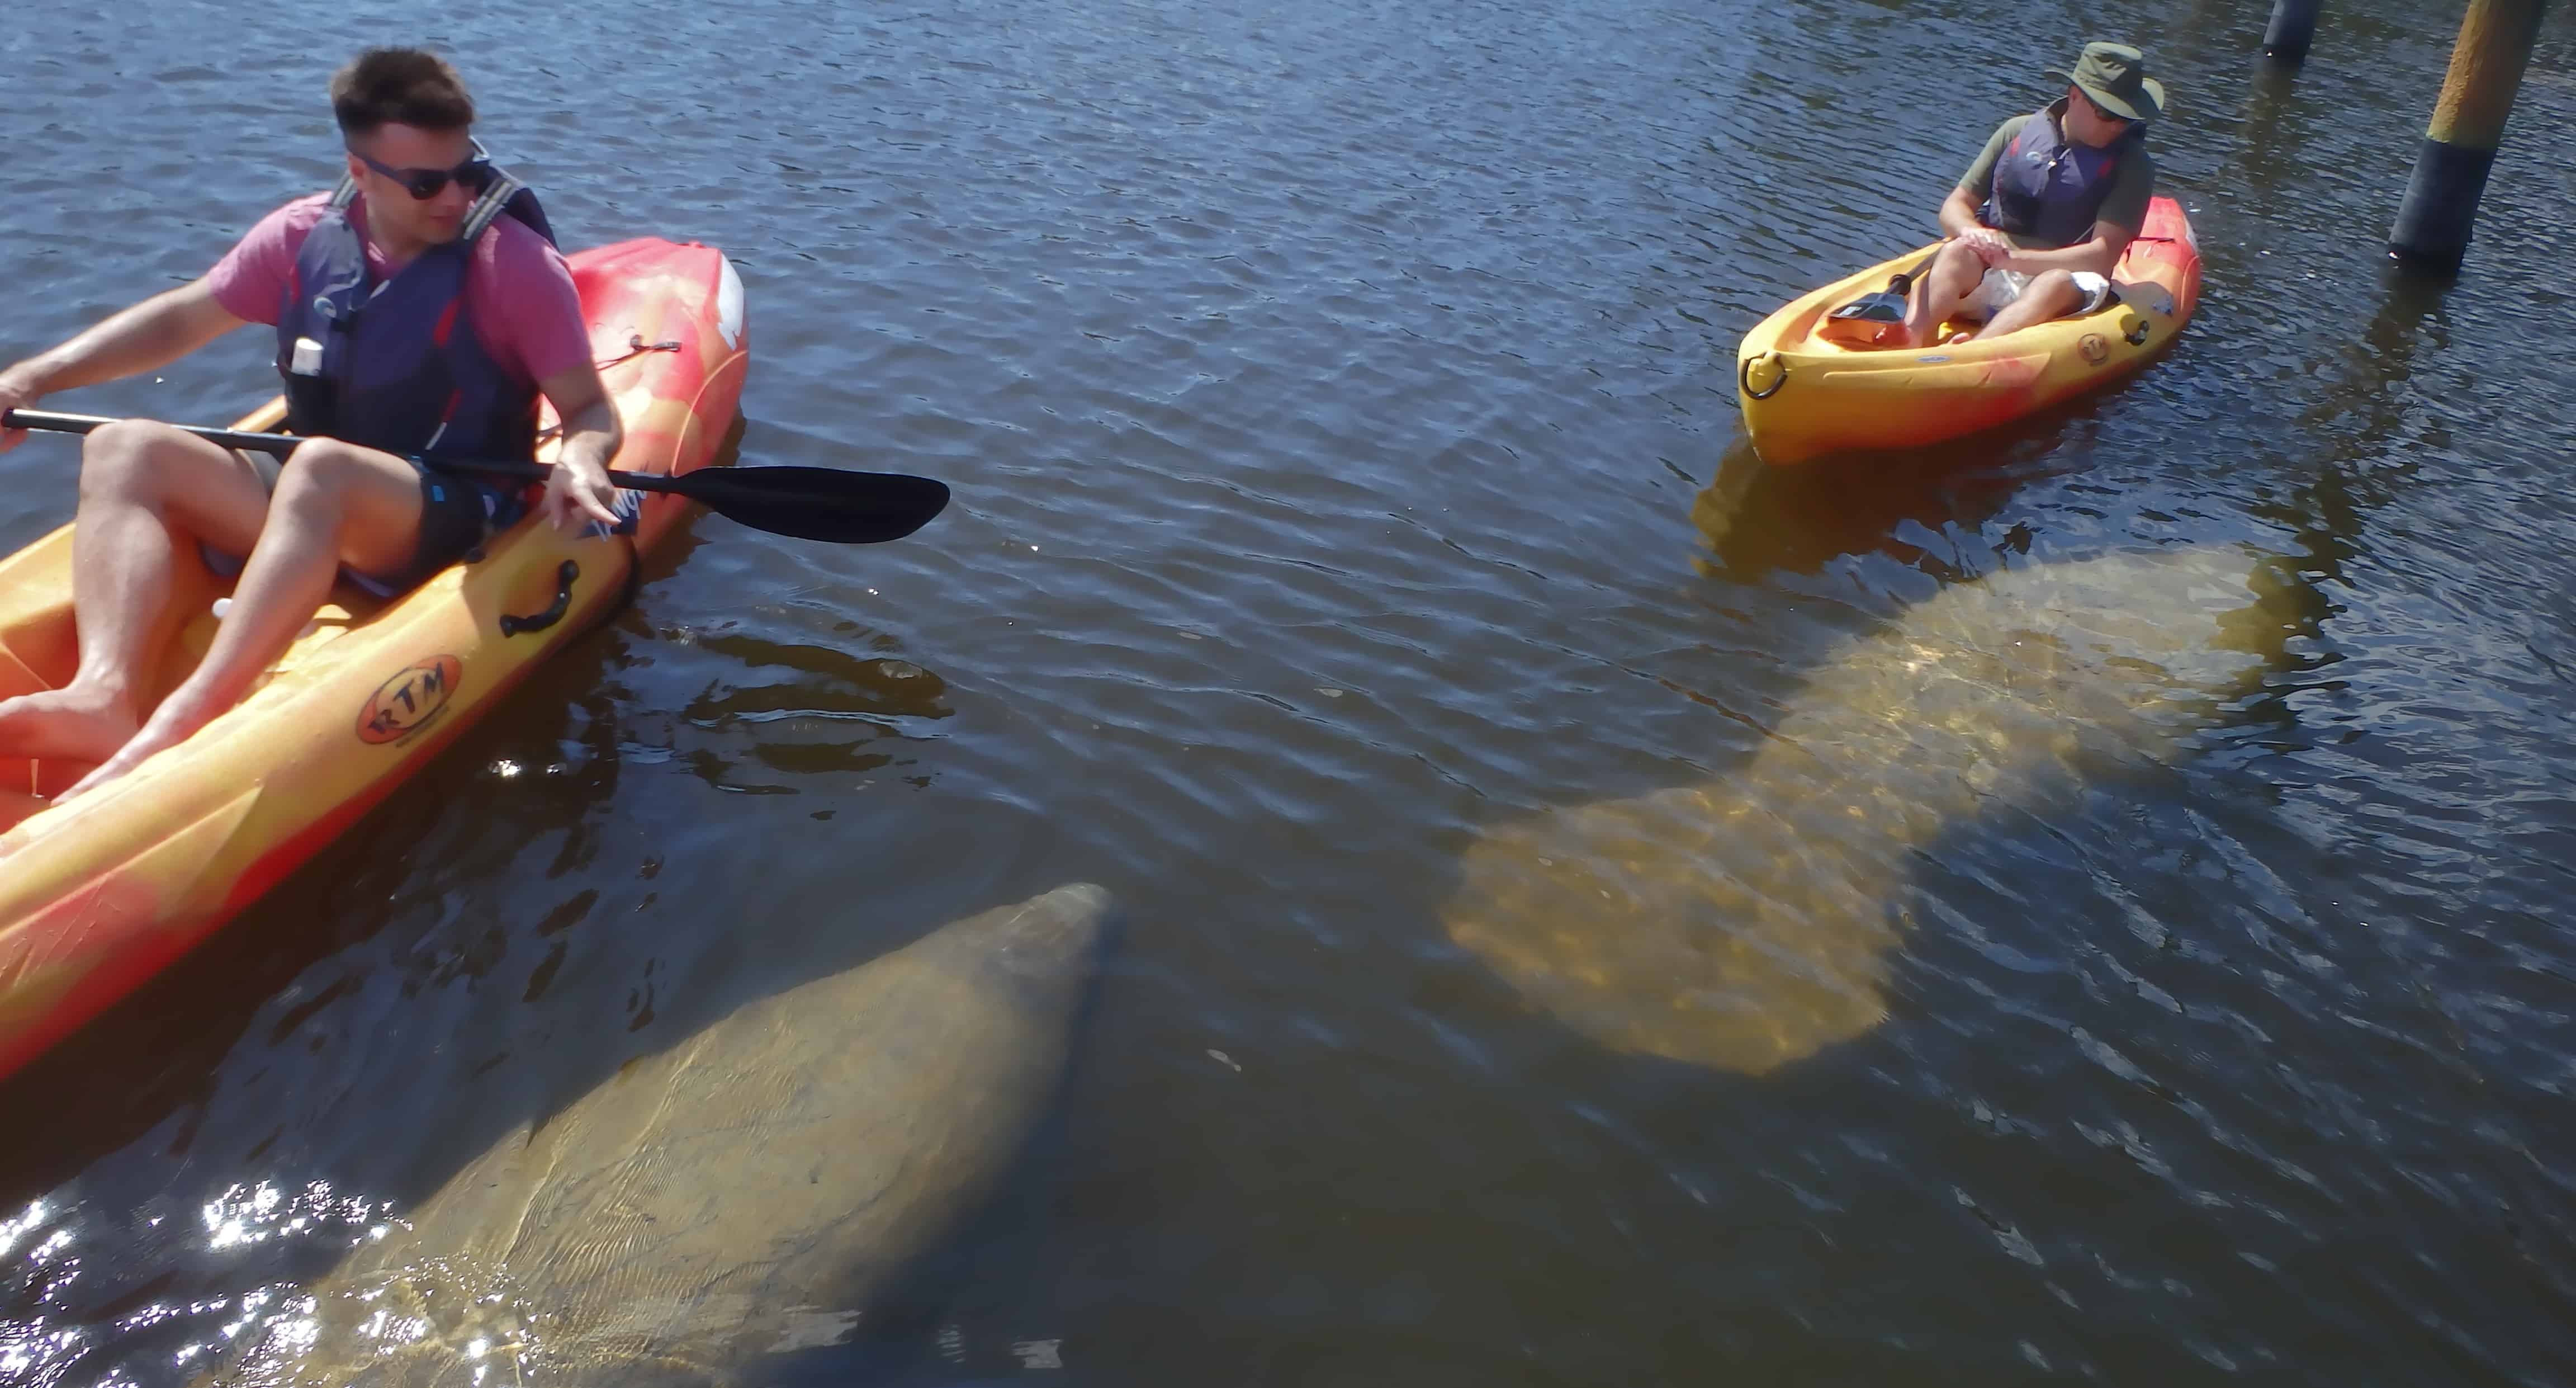 All-Day-Fort-Myers-Beach-Kayak-or-SUP-Rental